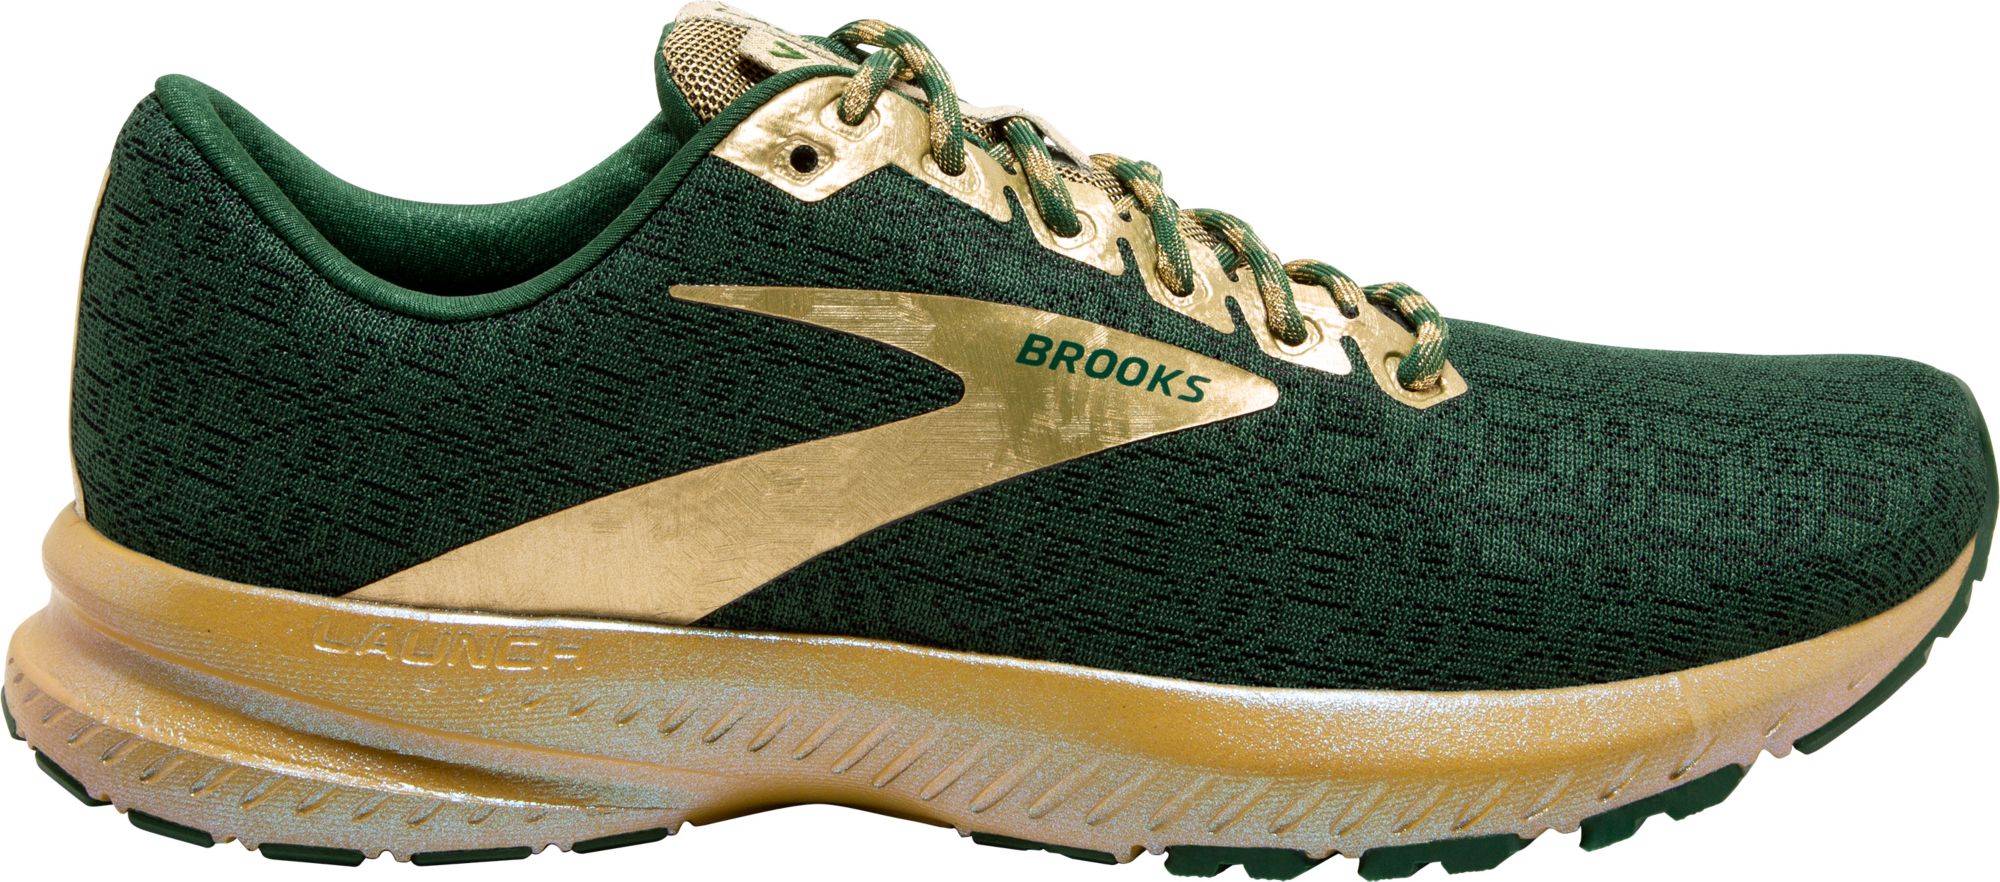 brooks shoes womens gold